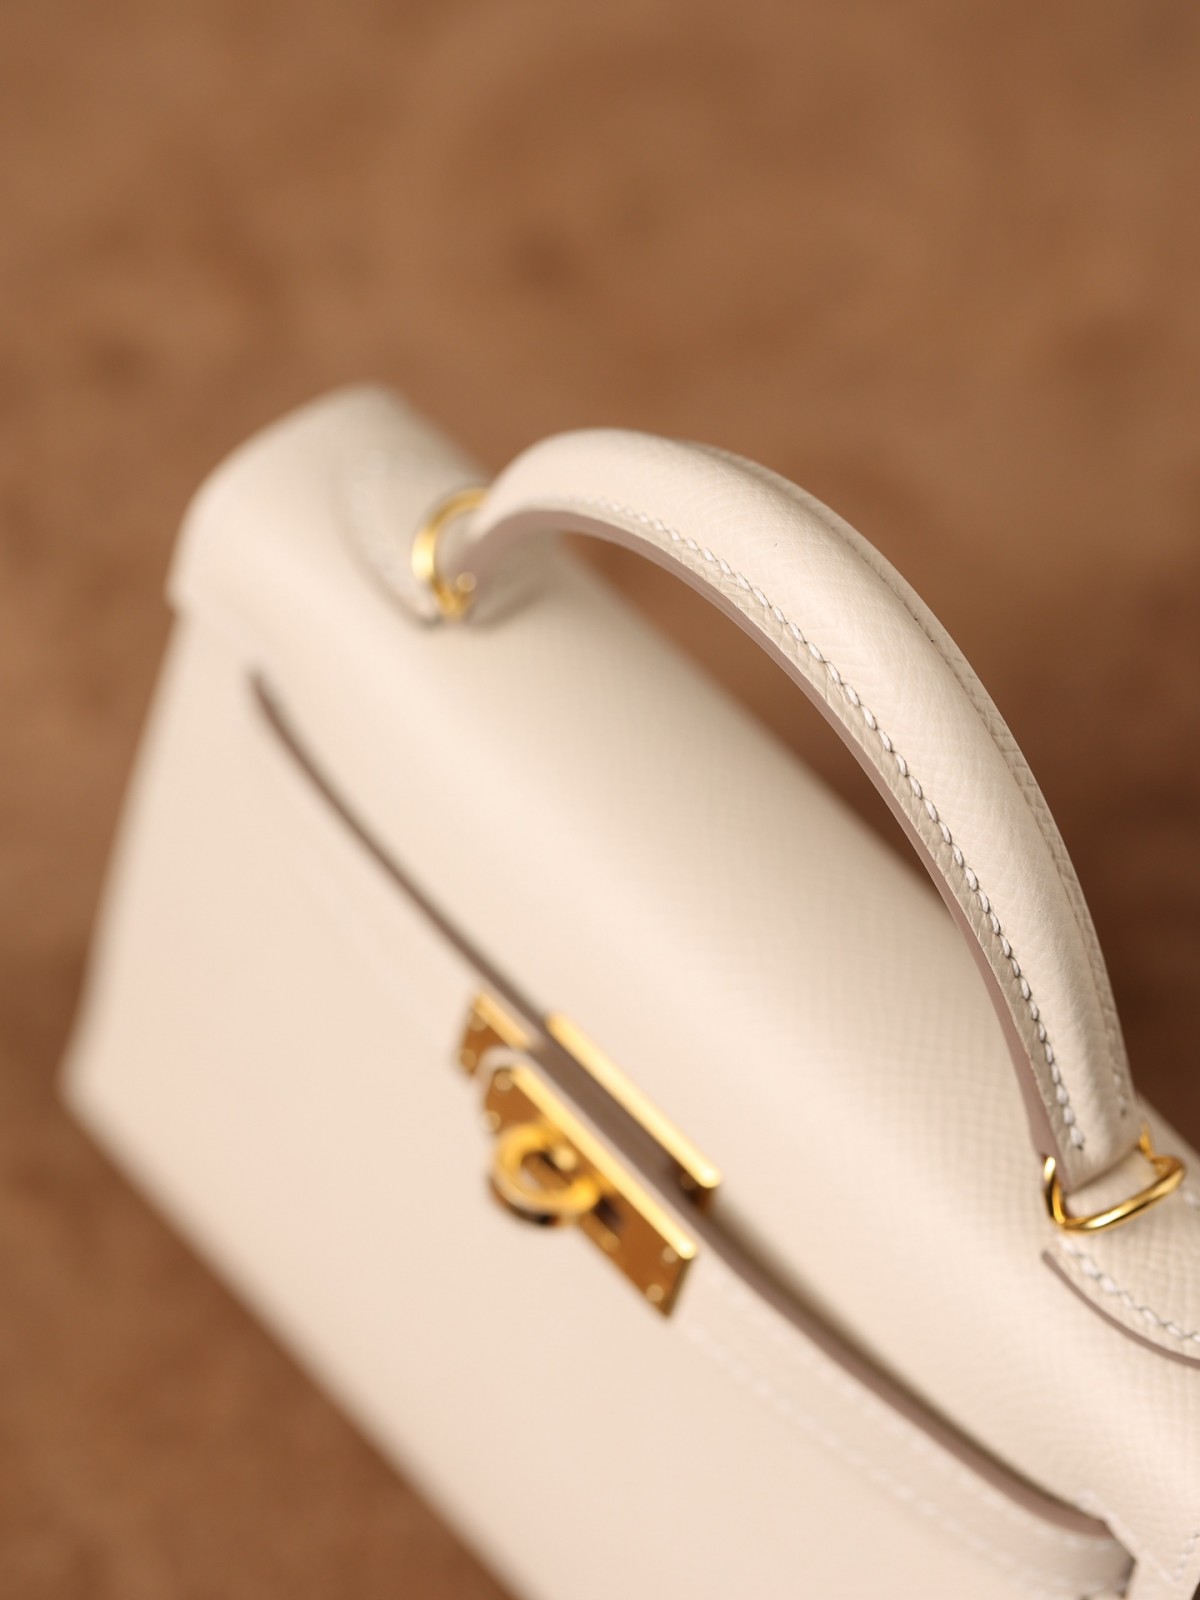 How great quality of Shebag Handmade White Mini Kelly 2 in Epsom leather? (2024 Week 5 White)-Best Quality Fake Louis Vuitton Bag Online Store, Replica designer bag ru